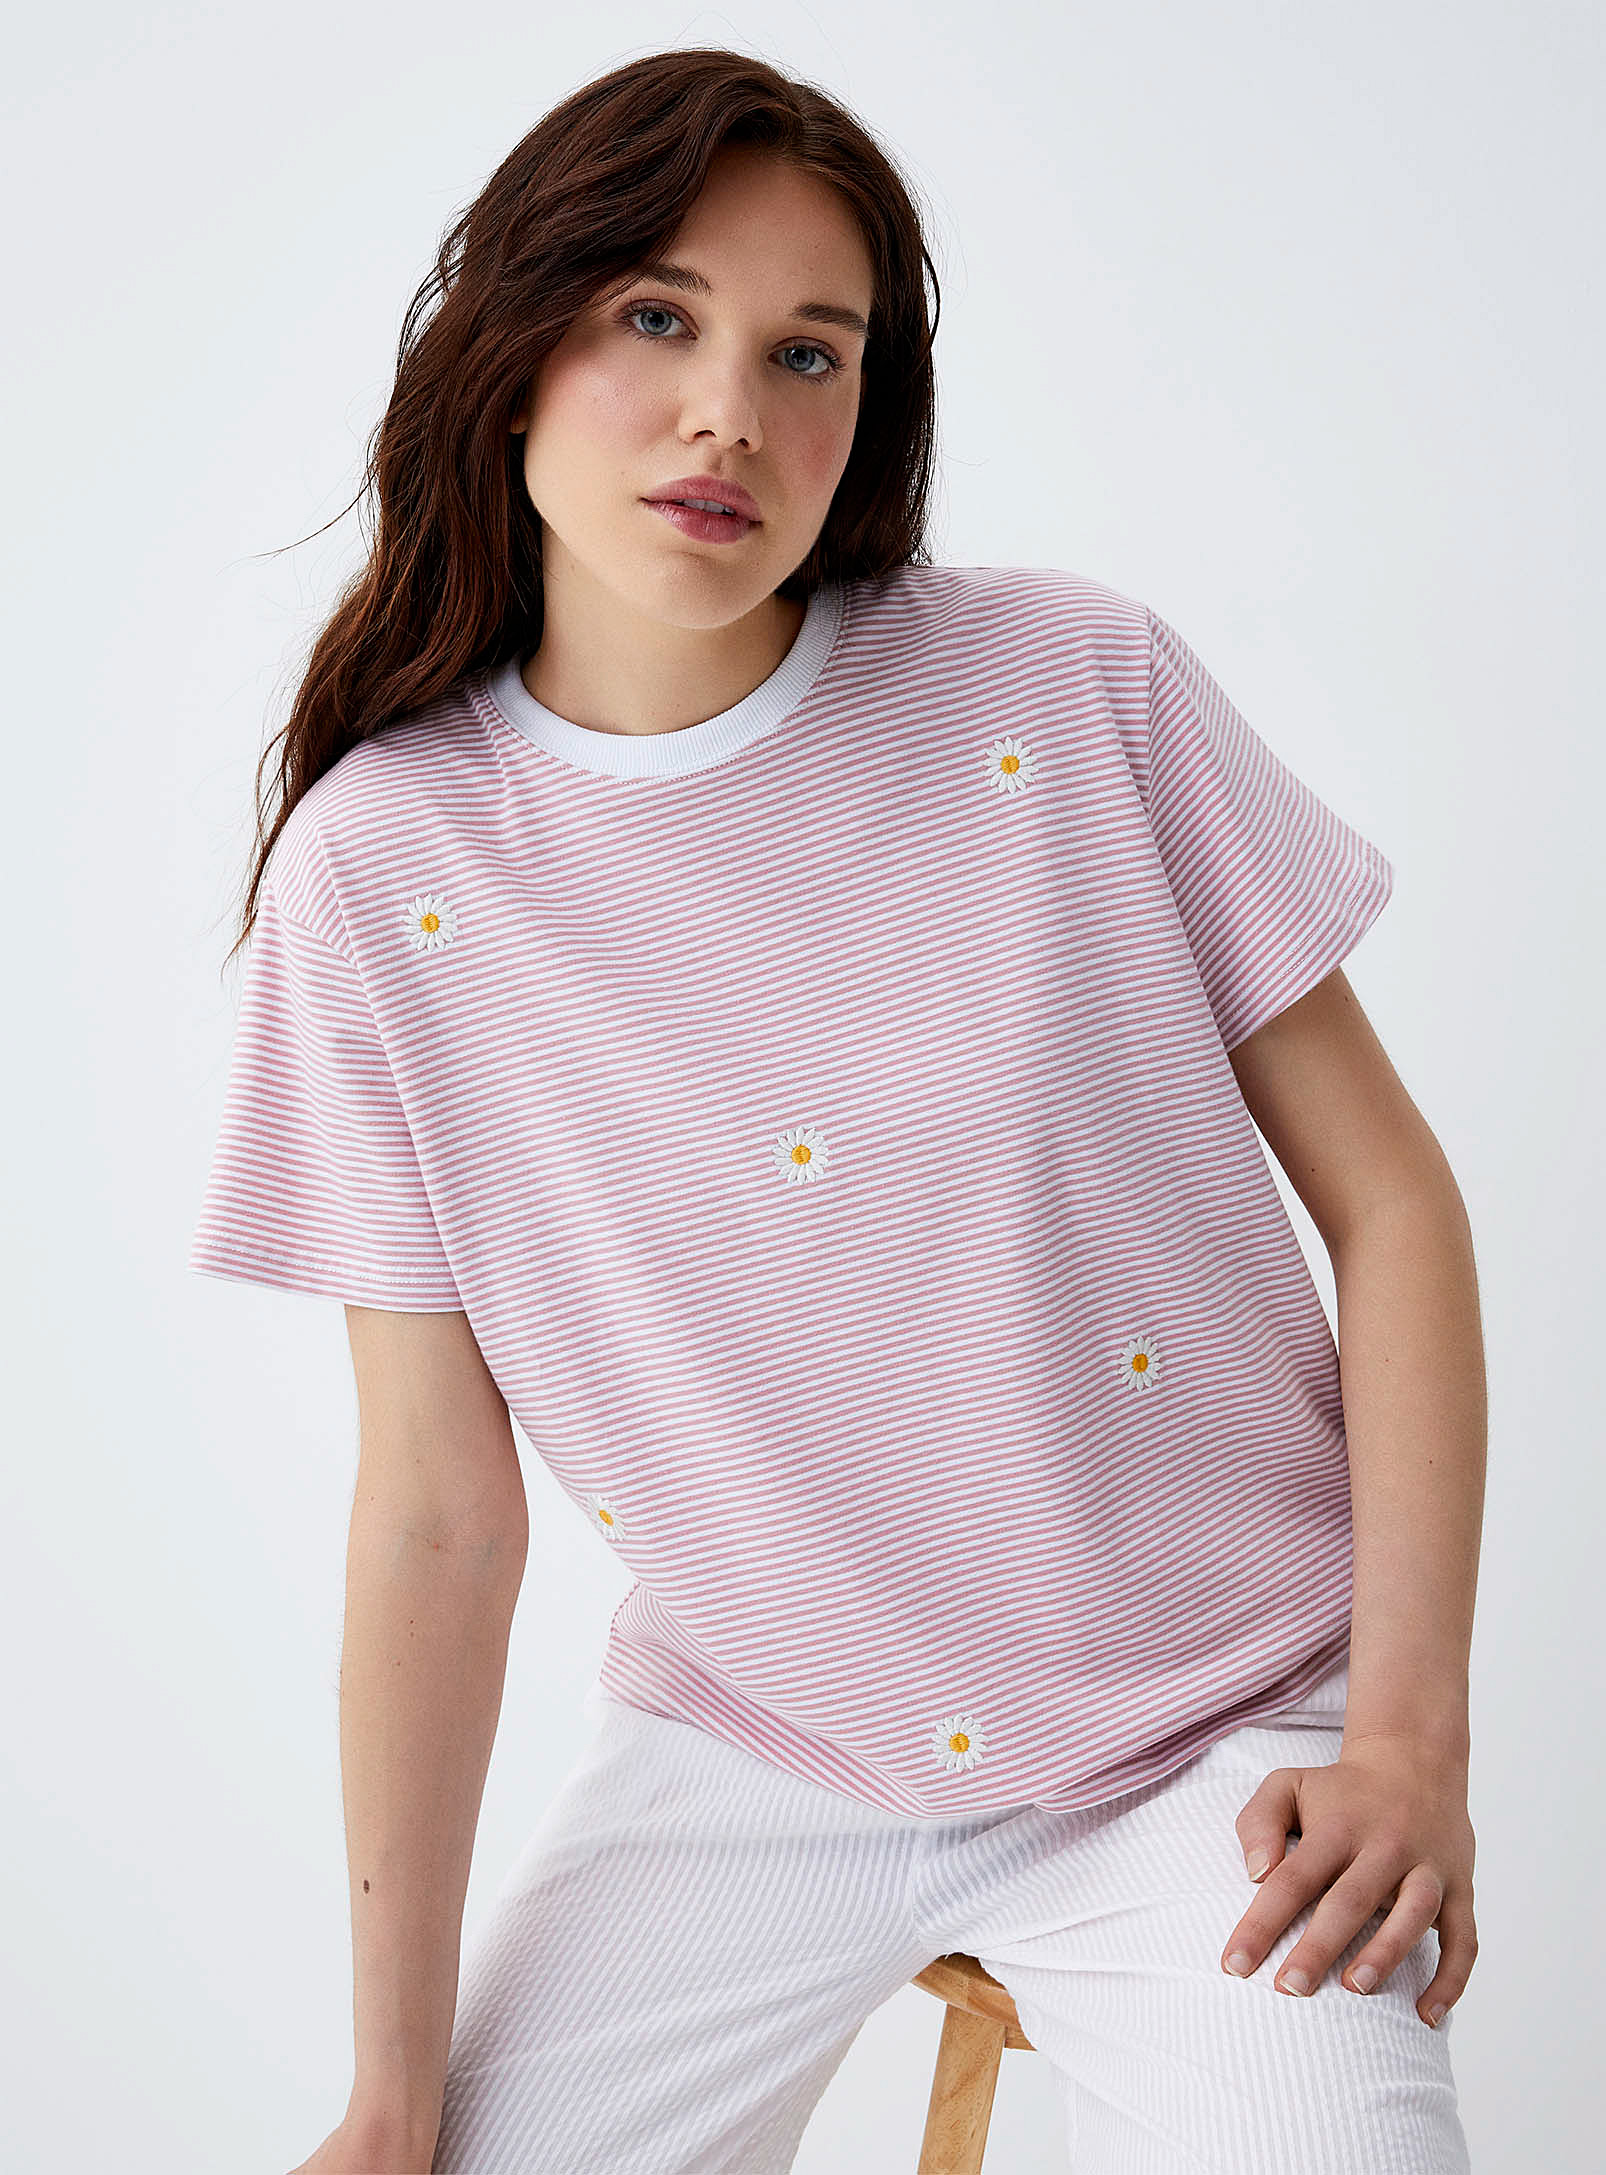 Things Between Daisies And Stripes T-shirt In Pink